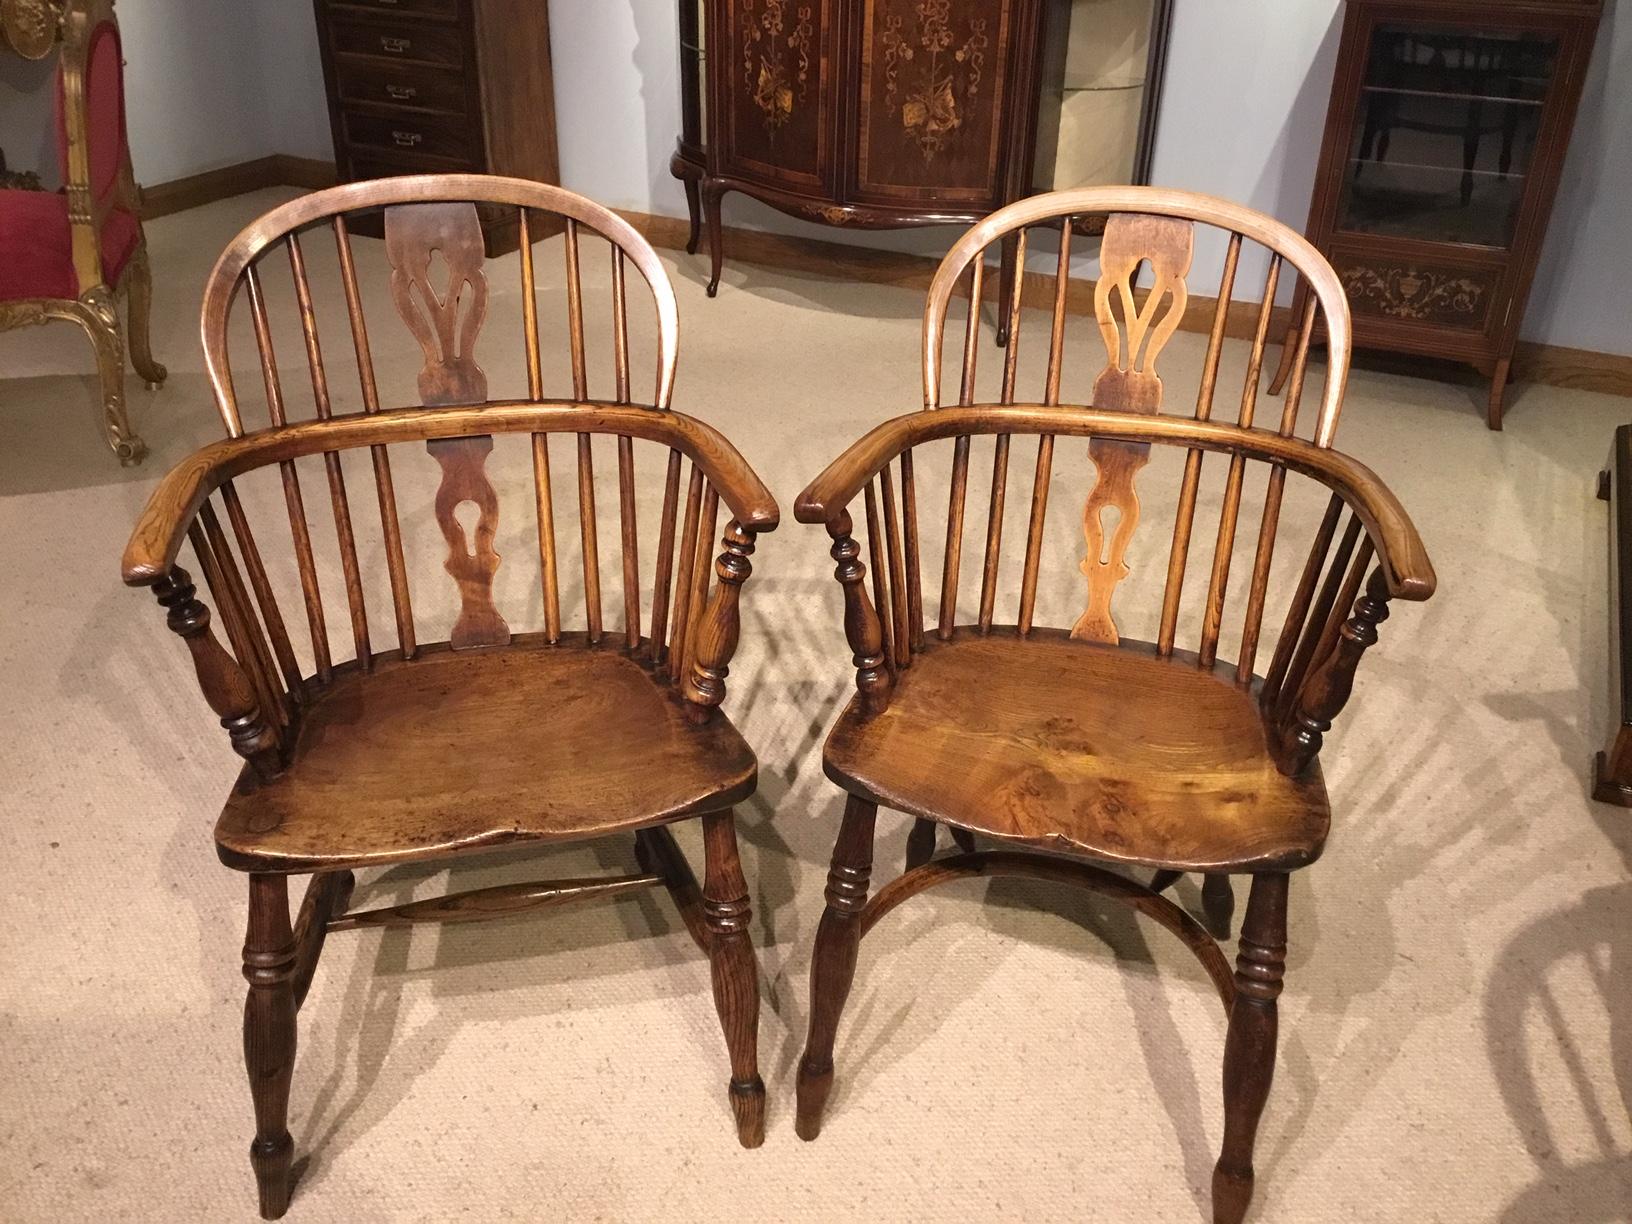 Lovely Harlequin Set of Six 19th Century Ash and Elm Antique Windsor Armchairs 3